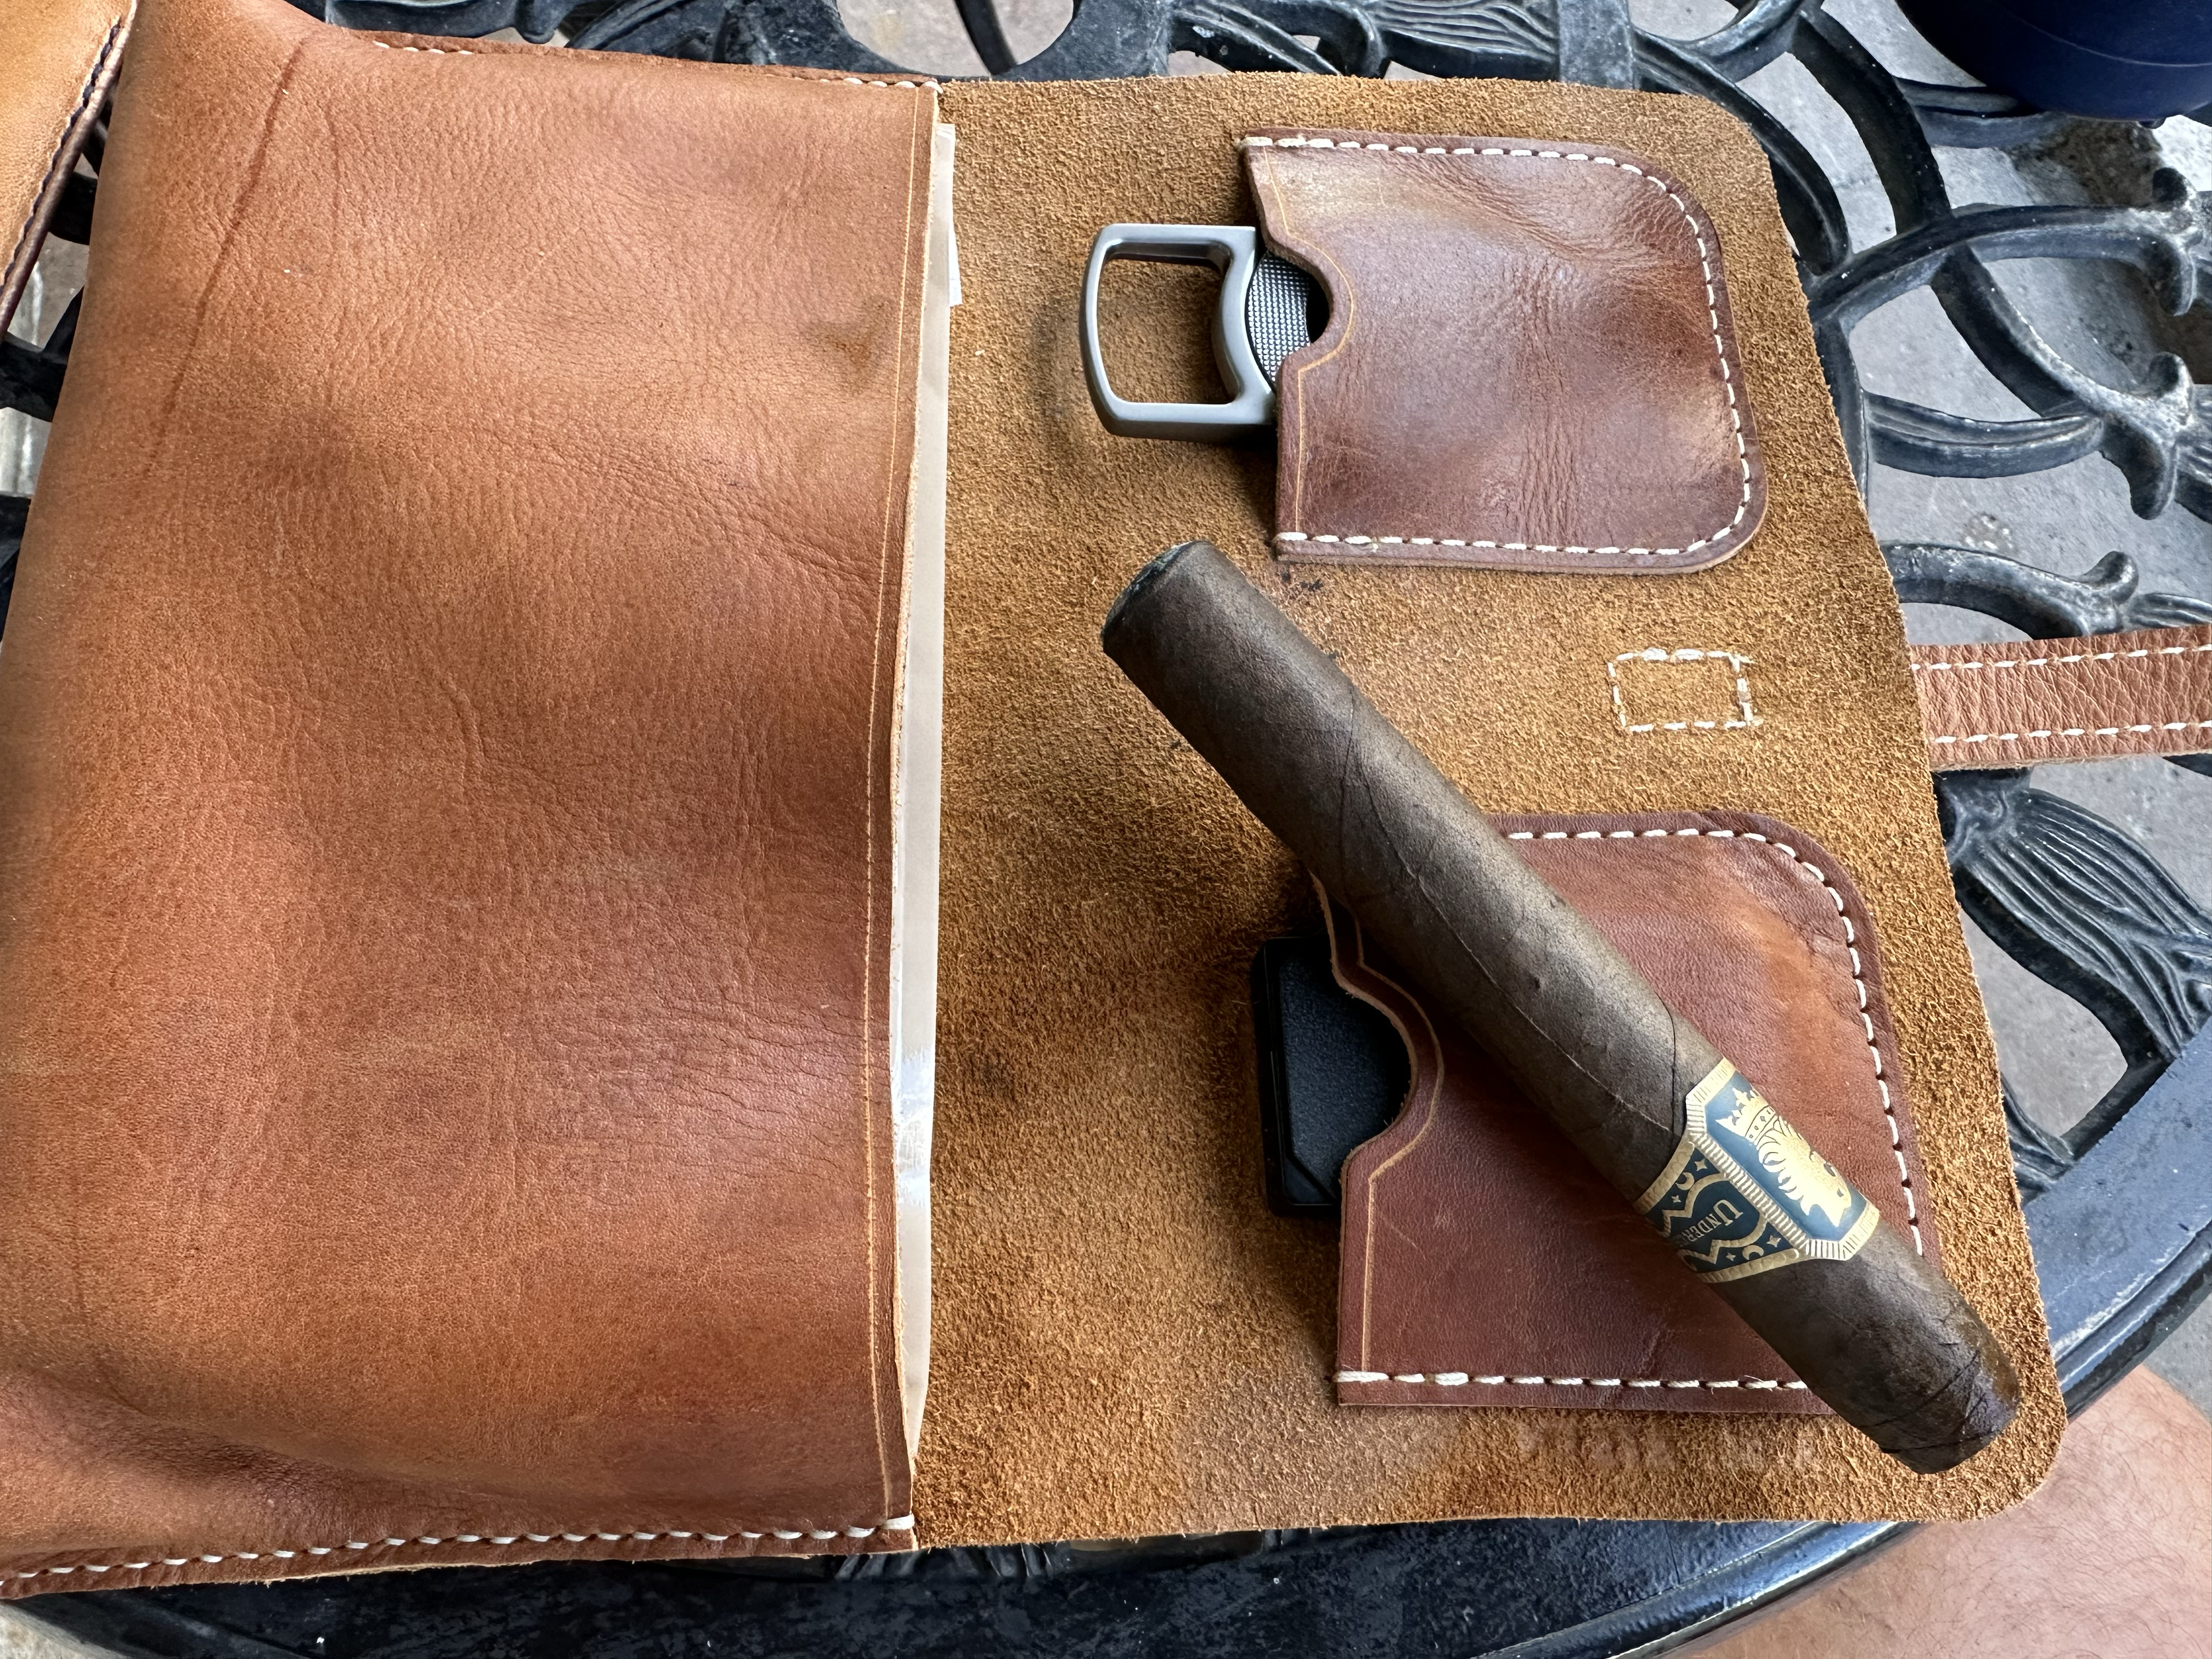 Undercrown Maduro cigar resting on top of a leather cigar case.